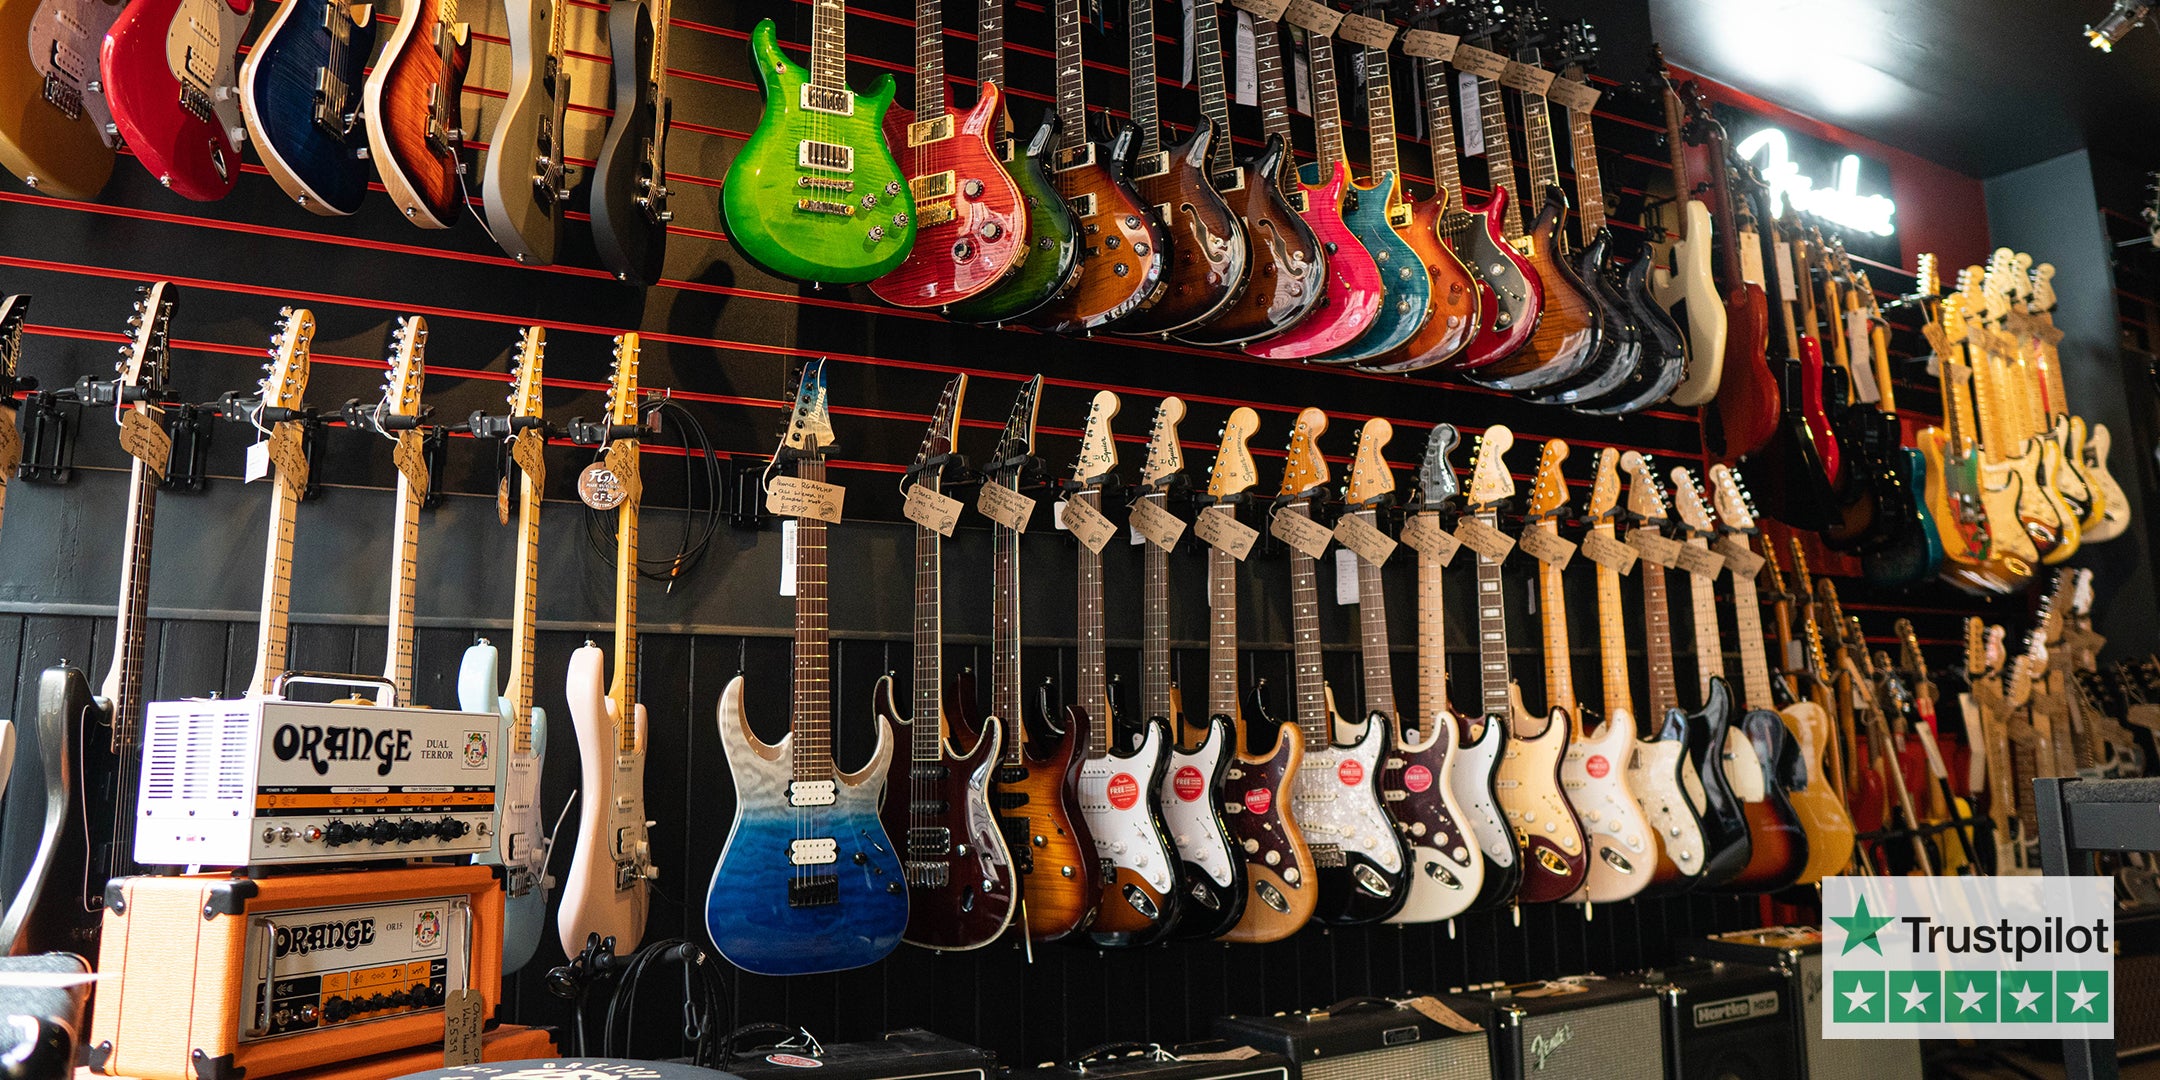 2 racks of electric guitars of all colours hanging on the wall surrounded by Amps at Guitar Bitz Guitar Shop